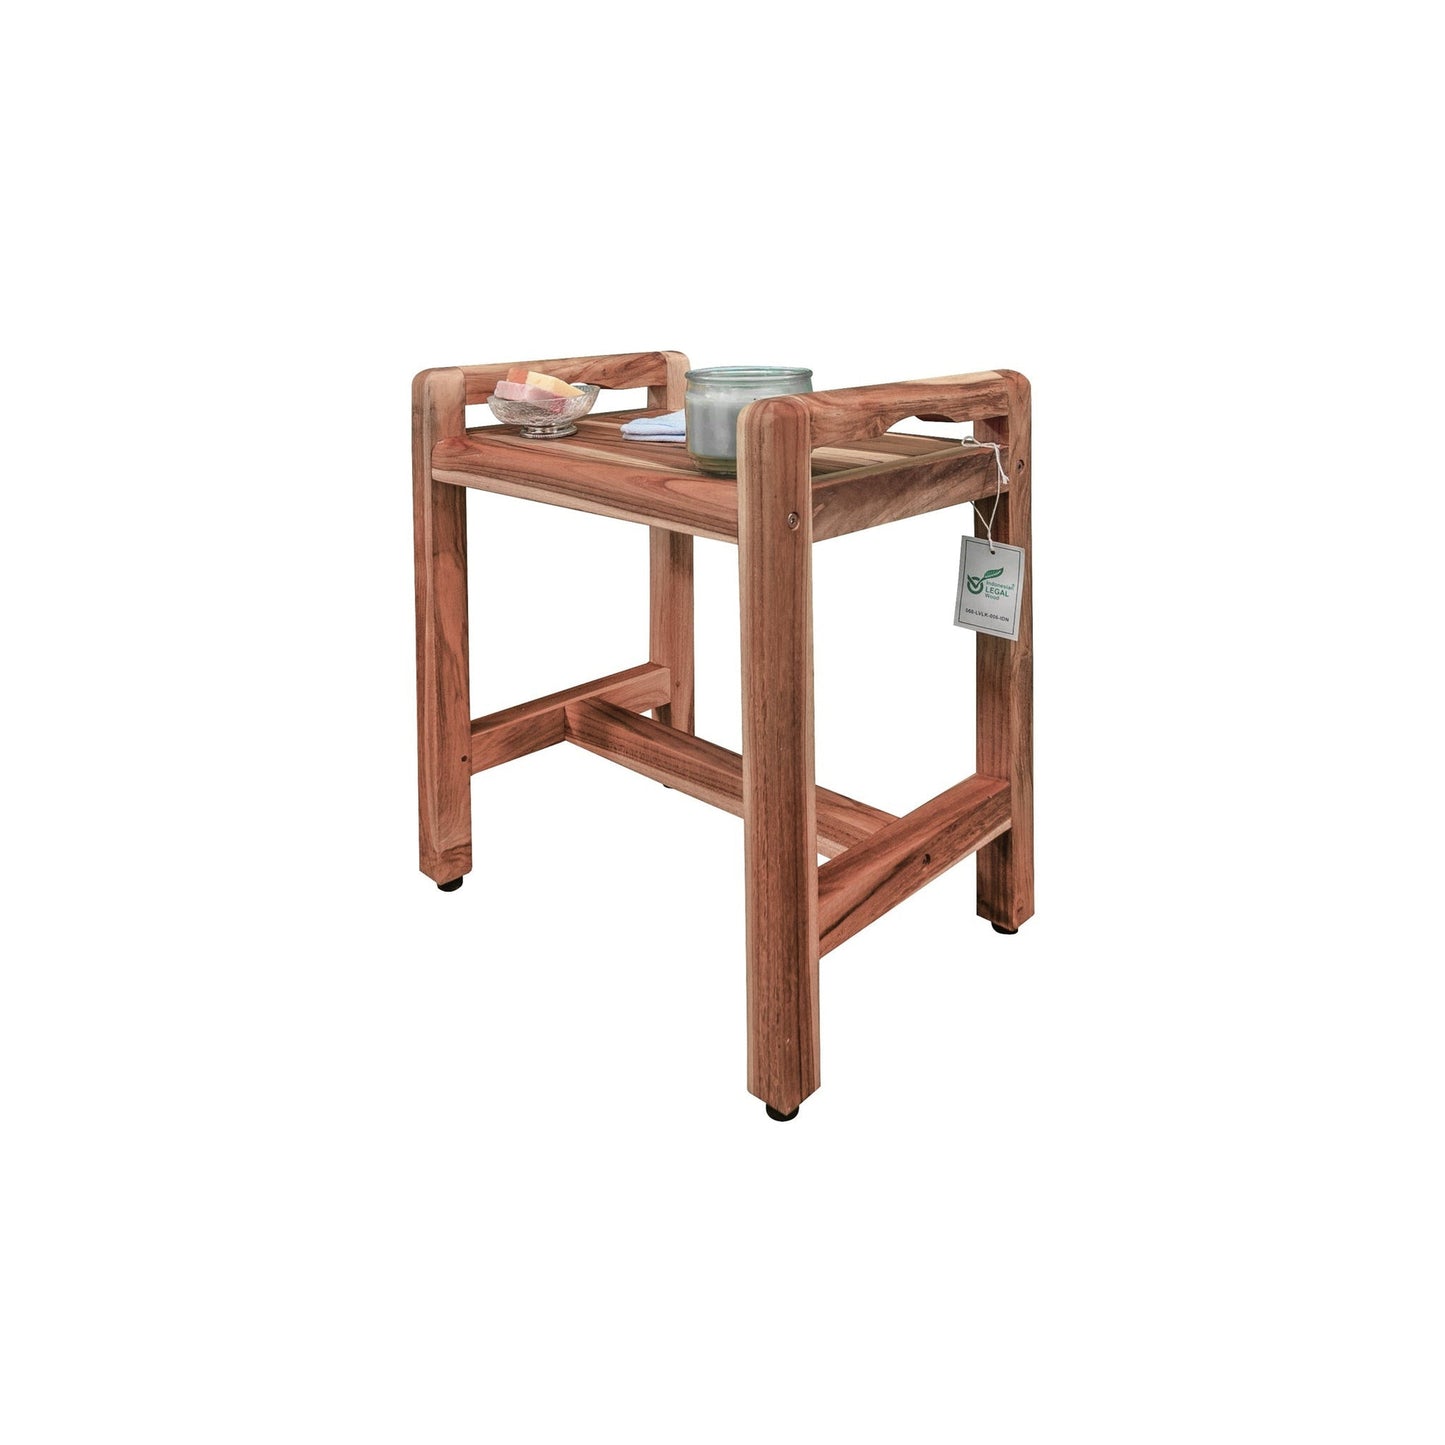 EcoDecors Eleganto 20" EarthyTeak Solid Teak Wood Shower Bench With LiftAide Arms